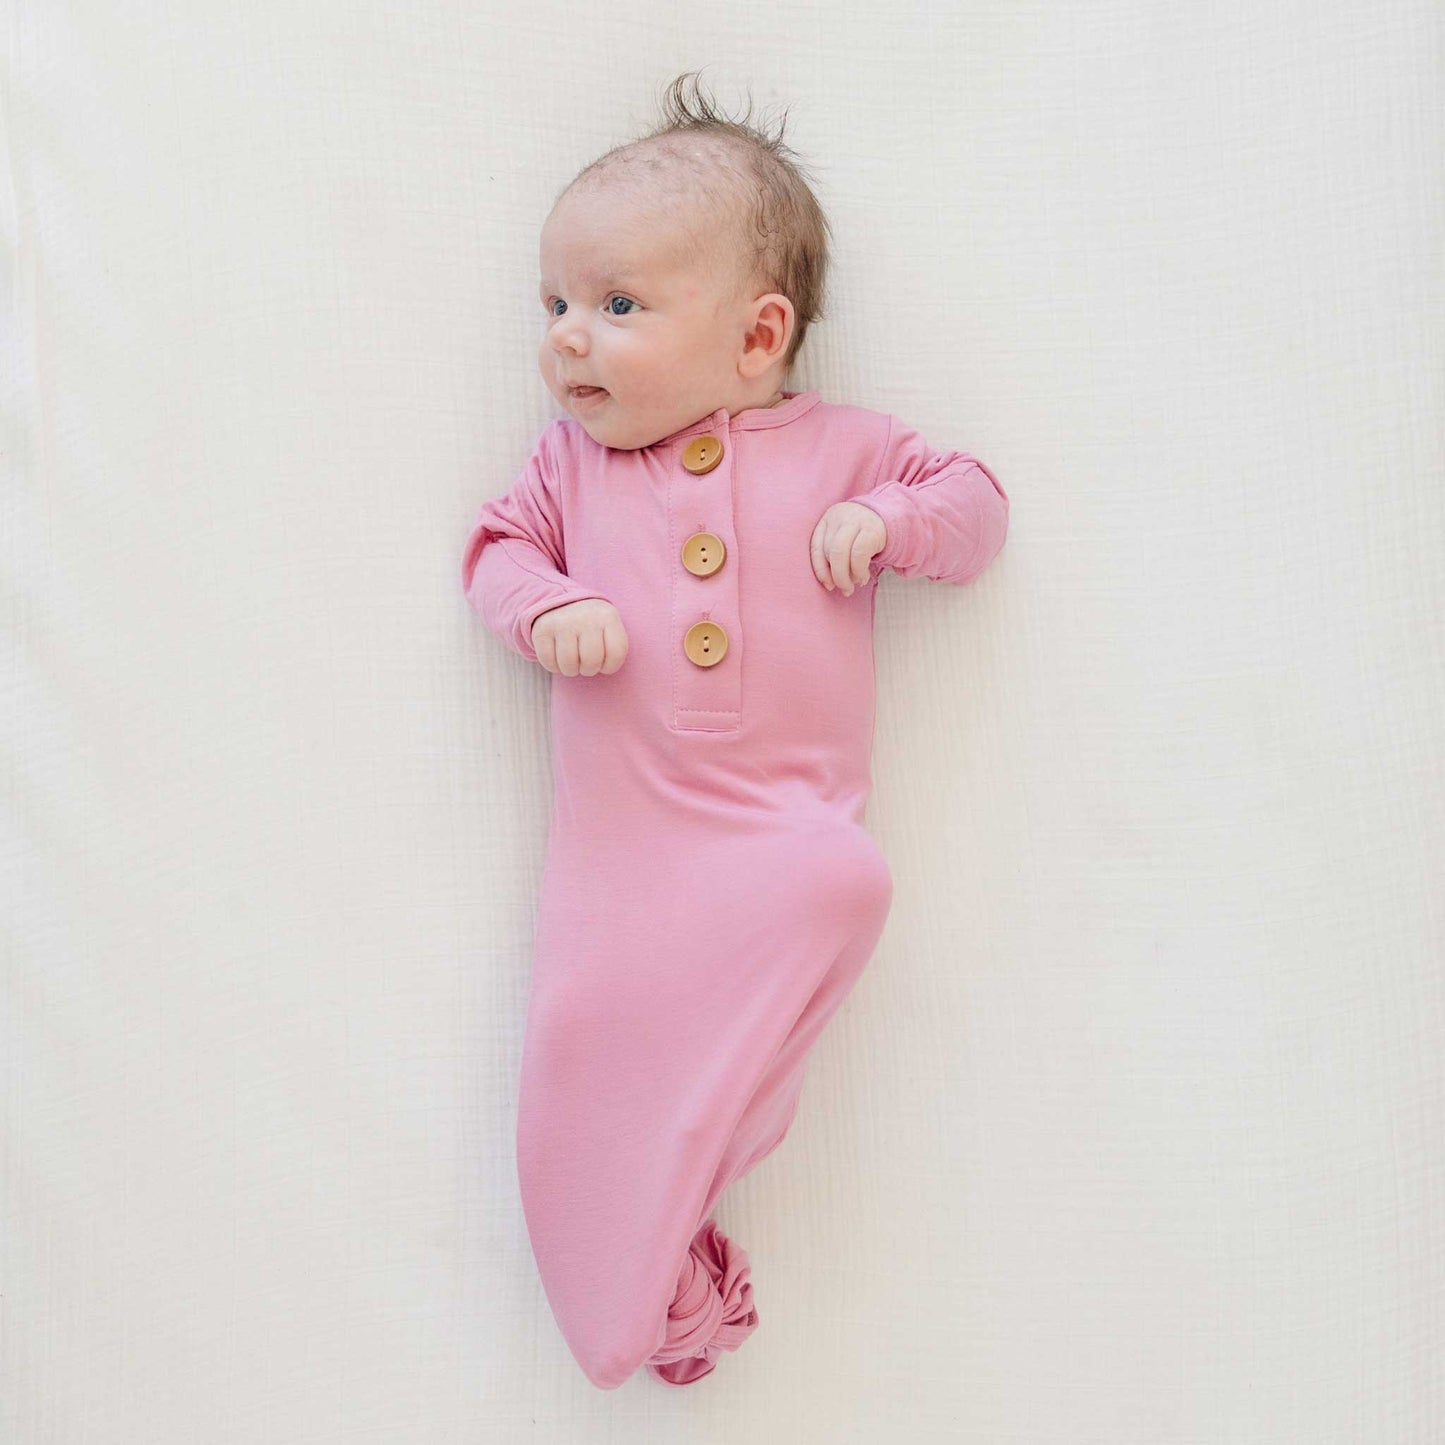 knotted baby gown, infant going home outfit, baby girl knotted gown, solid pink baby gown